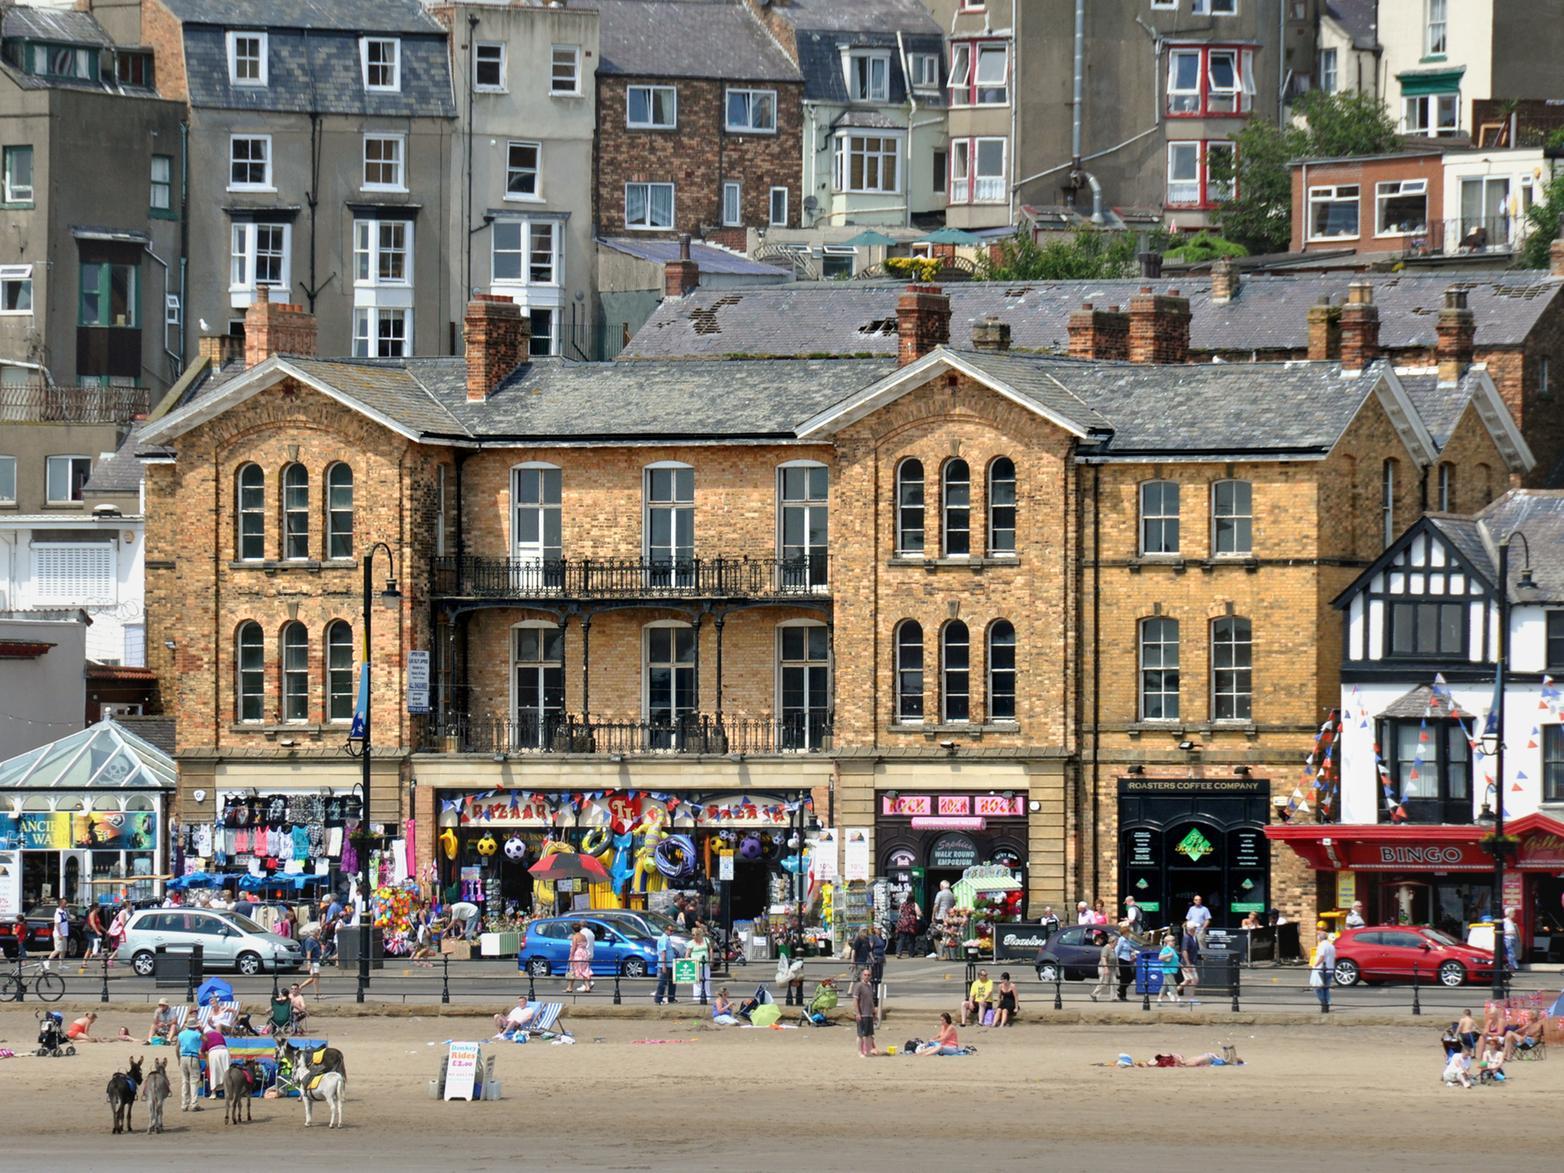 The iconic Grade II-listed former hospital on Scarborough's seafront dates back to the mid-19th century. It is now on the market for 2.25 million.